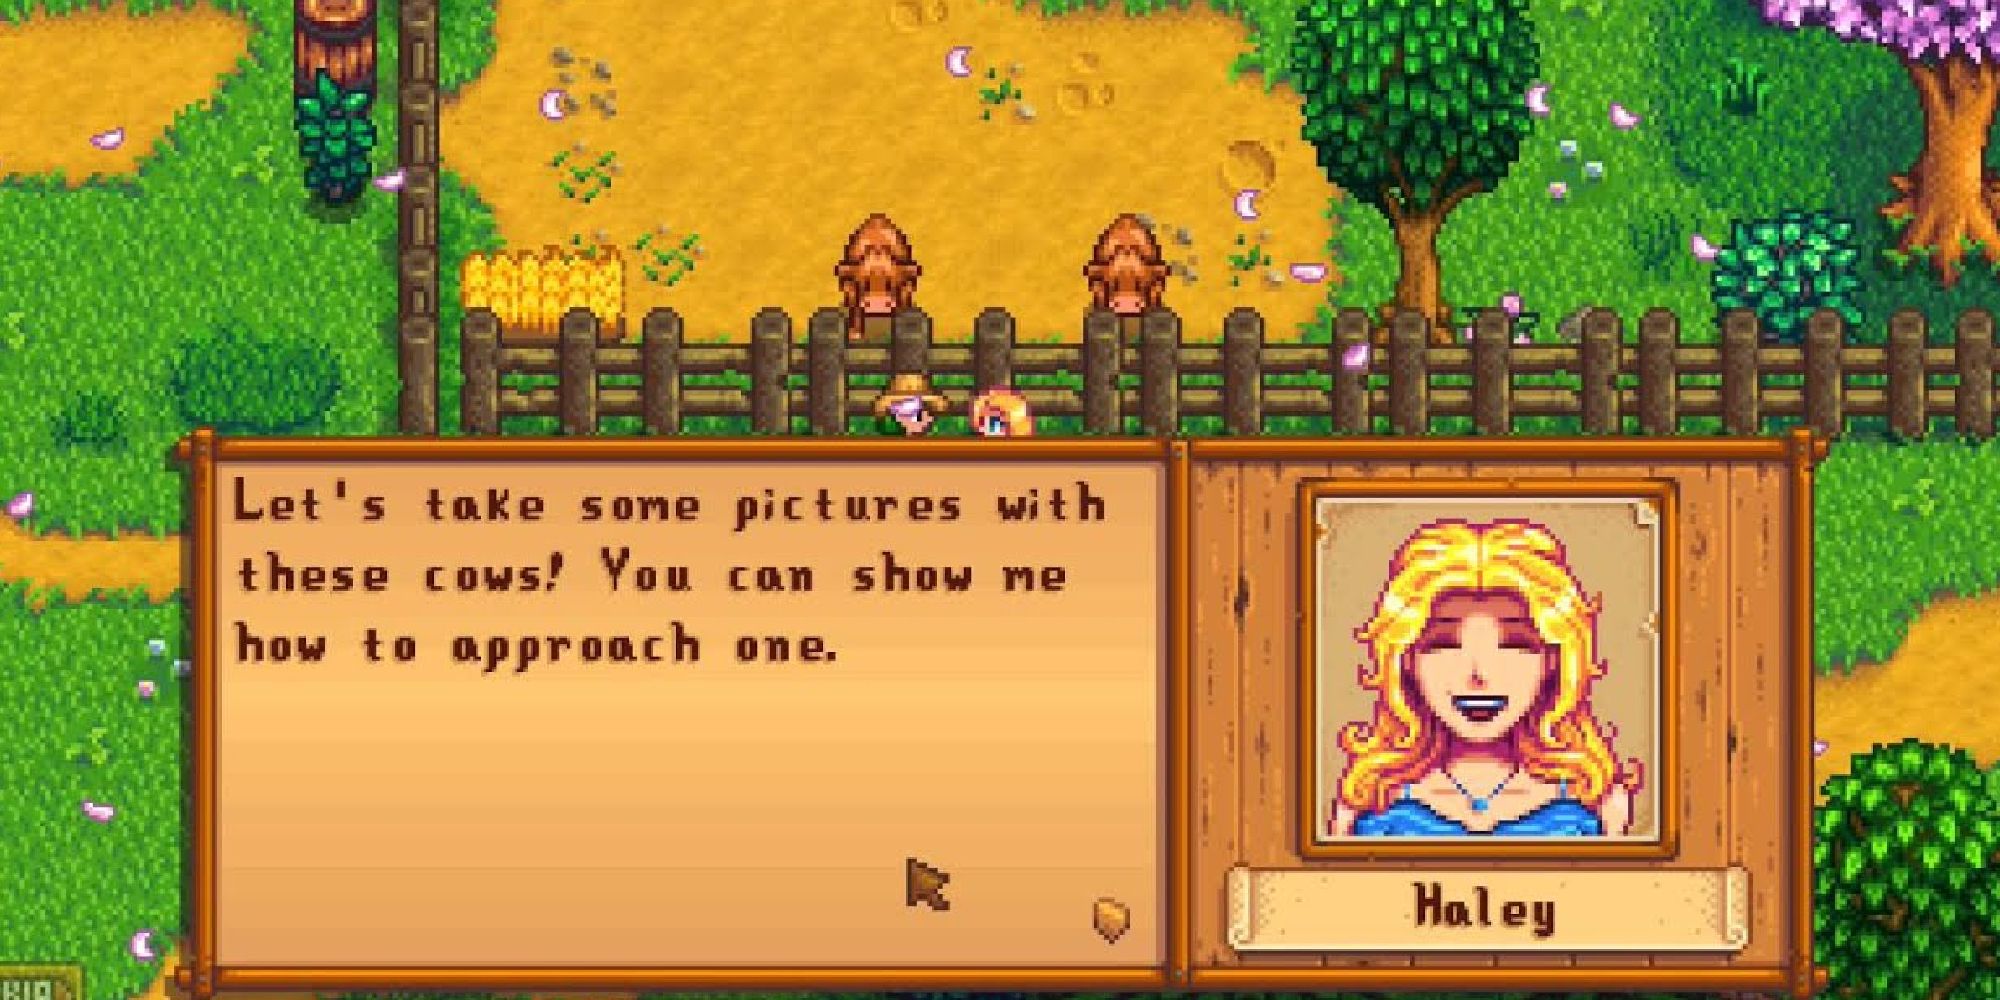 Haley and Player talking about cow photography